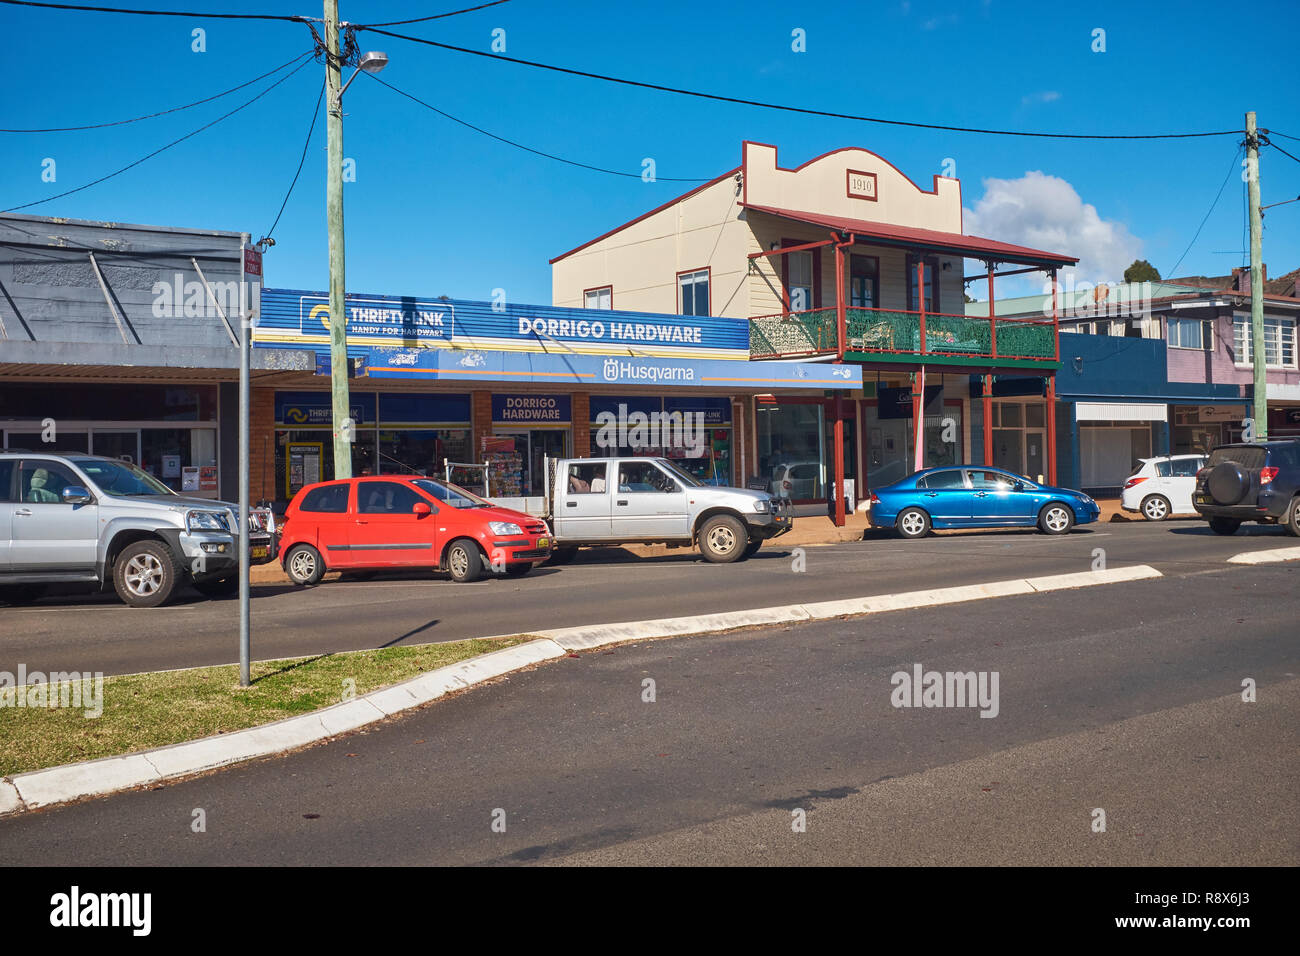 Shops along the side of the street including a hardware store with vehicles parked outside in Dorrigo New South Wales, Australia Stock Photo